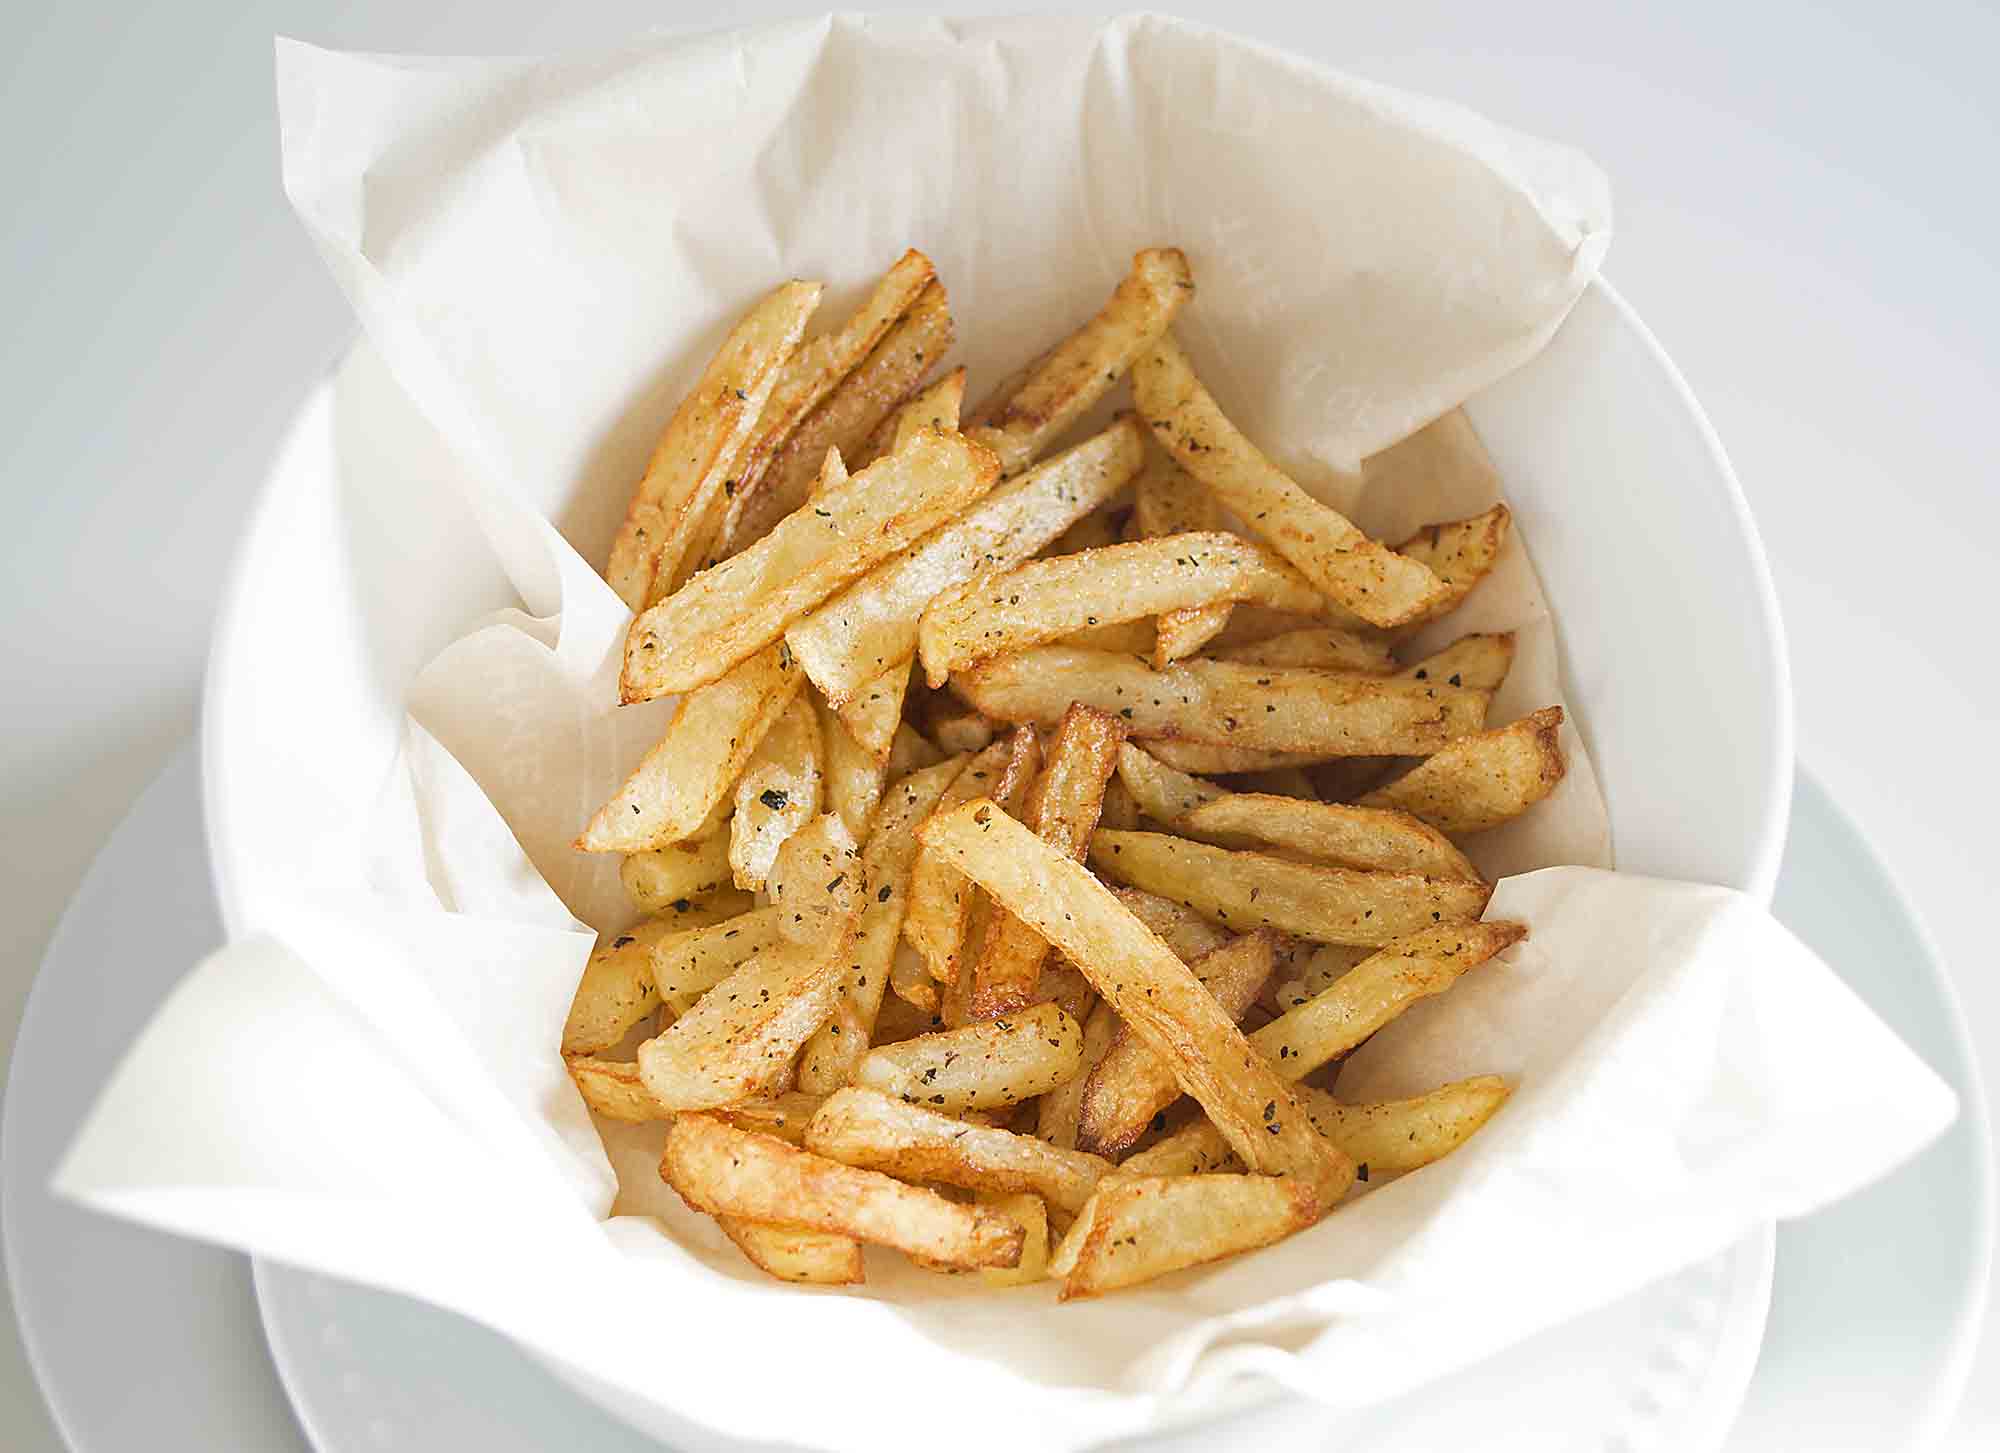 Homemade French Fry Seasoning - Spice up your Fries